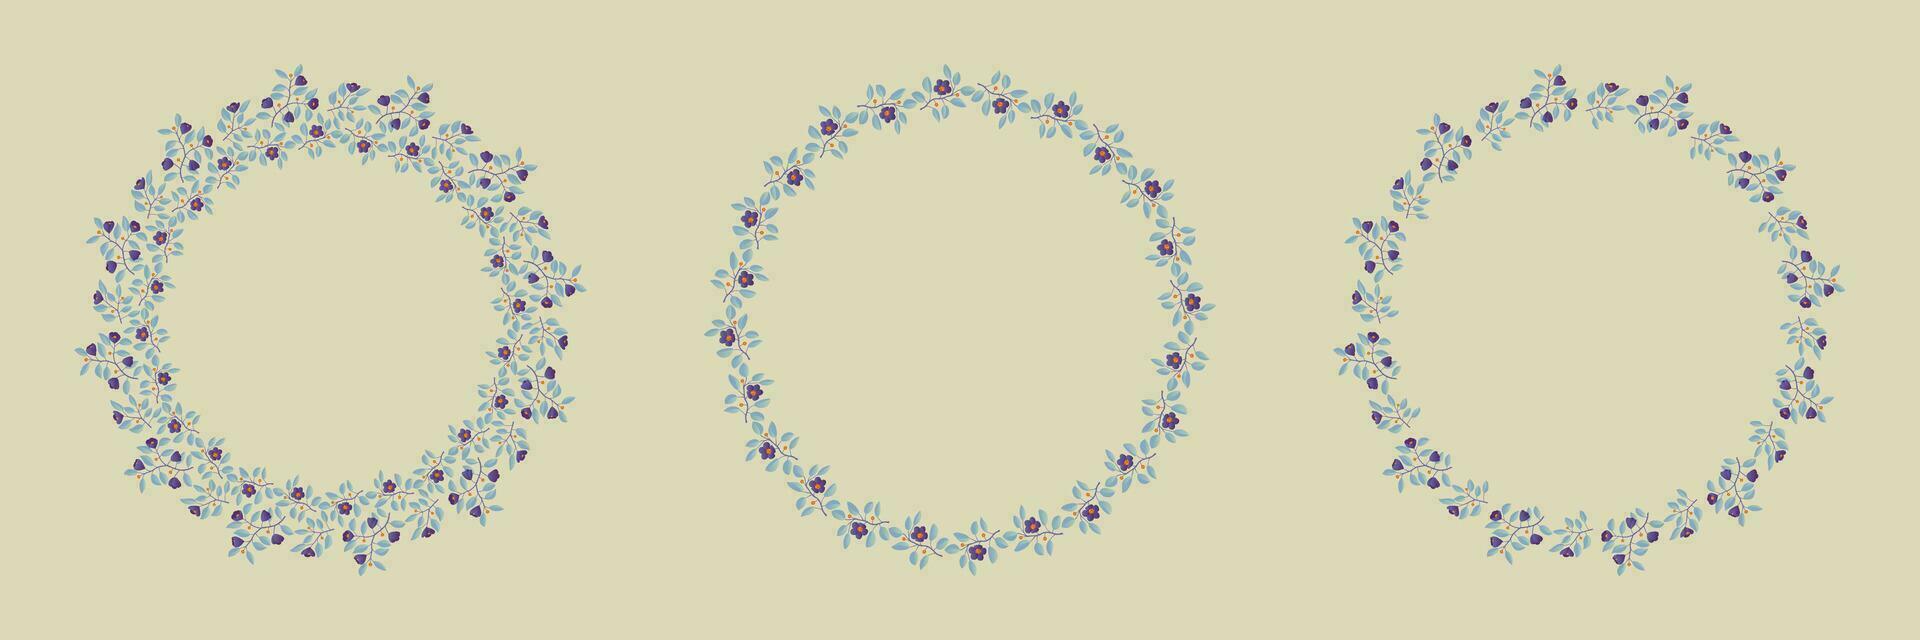 Set of floral isolated vector wreaths, branches with leaves and purple flowers on light grey